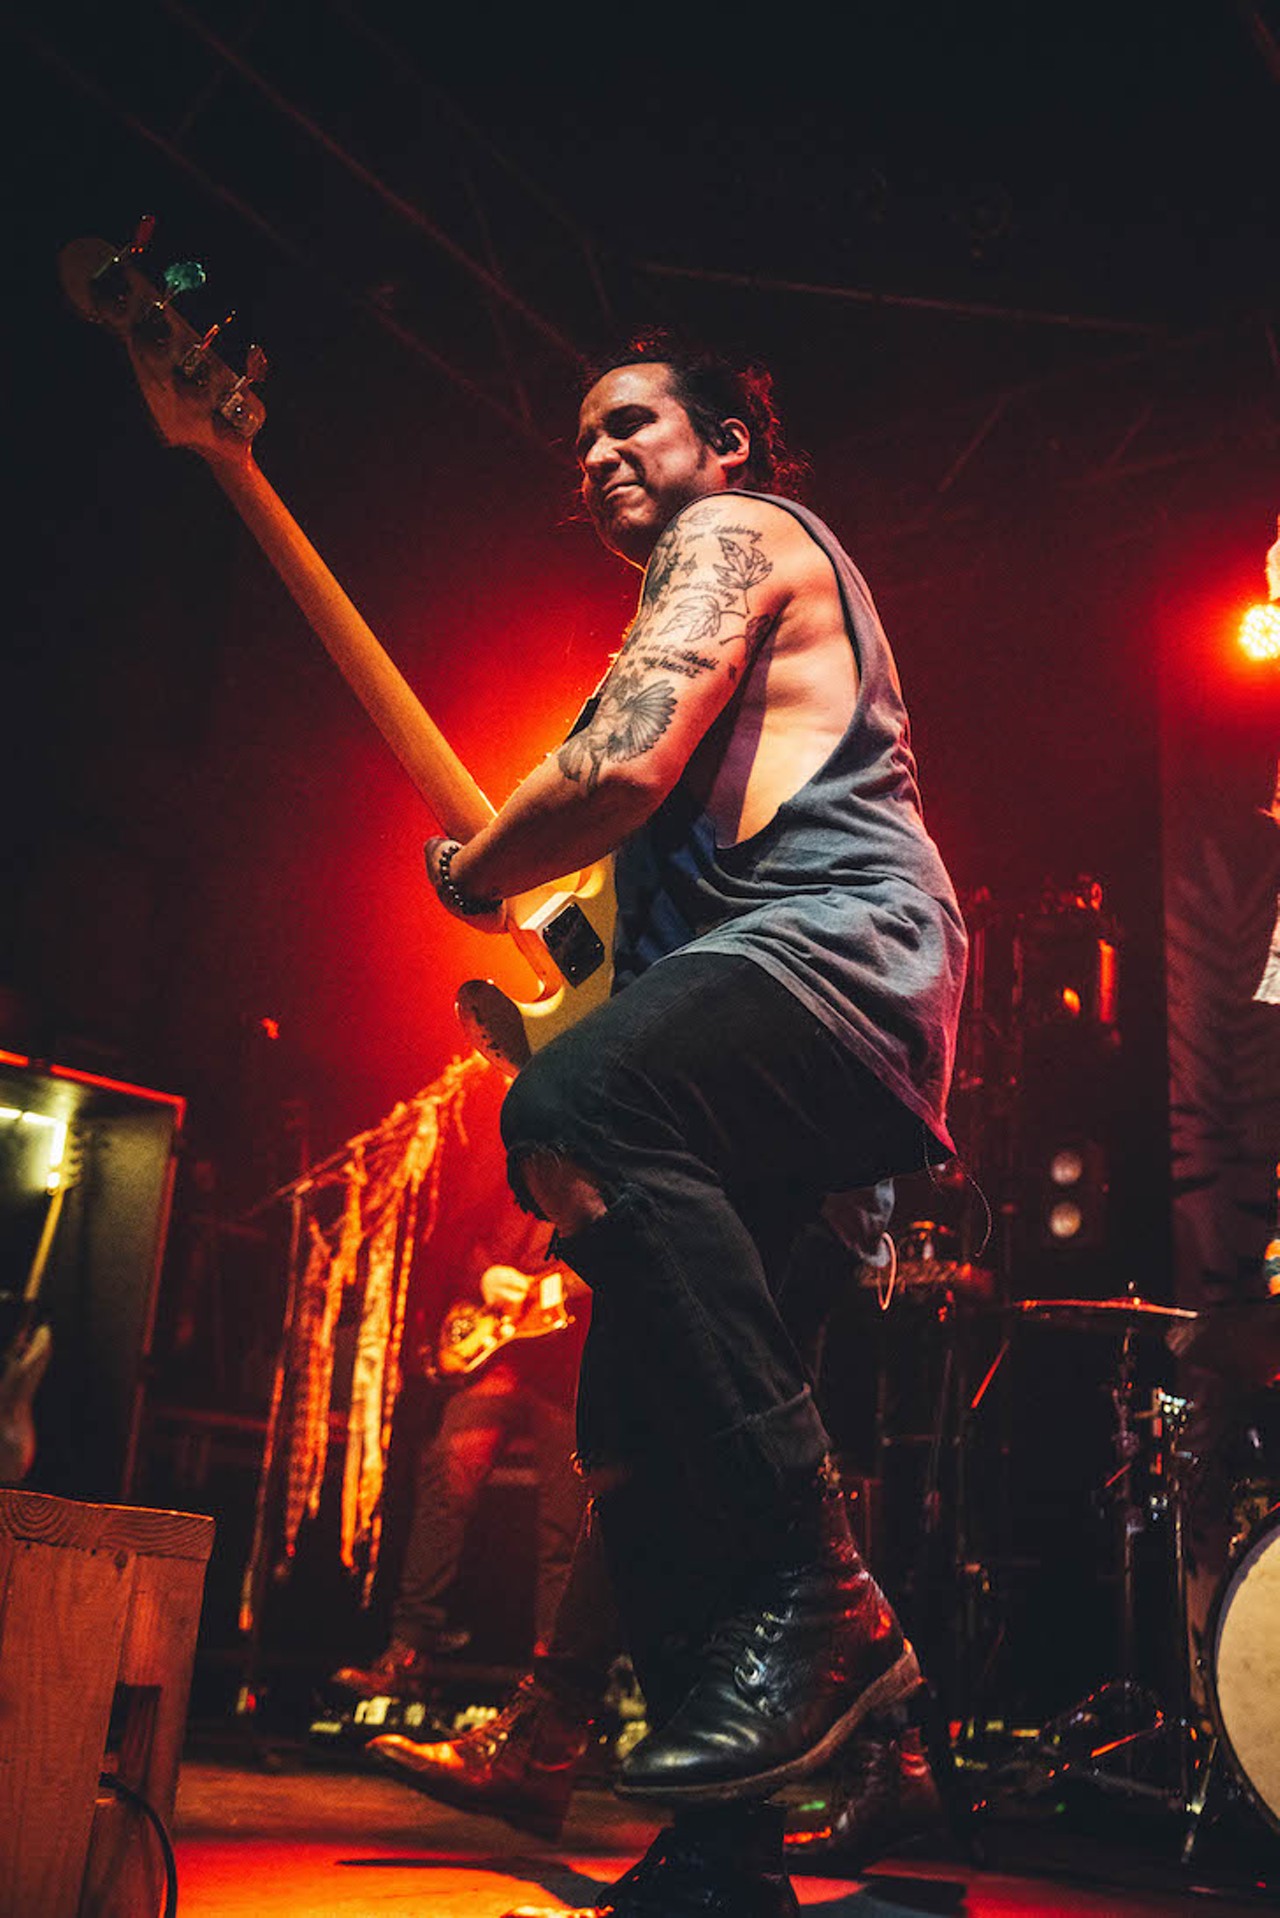 Photos from American Authors, Magic Giant and Public at the Beacham